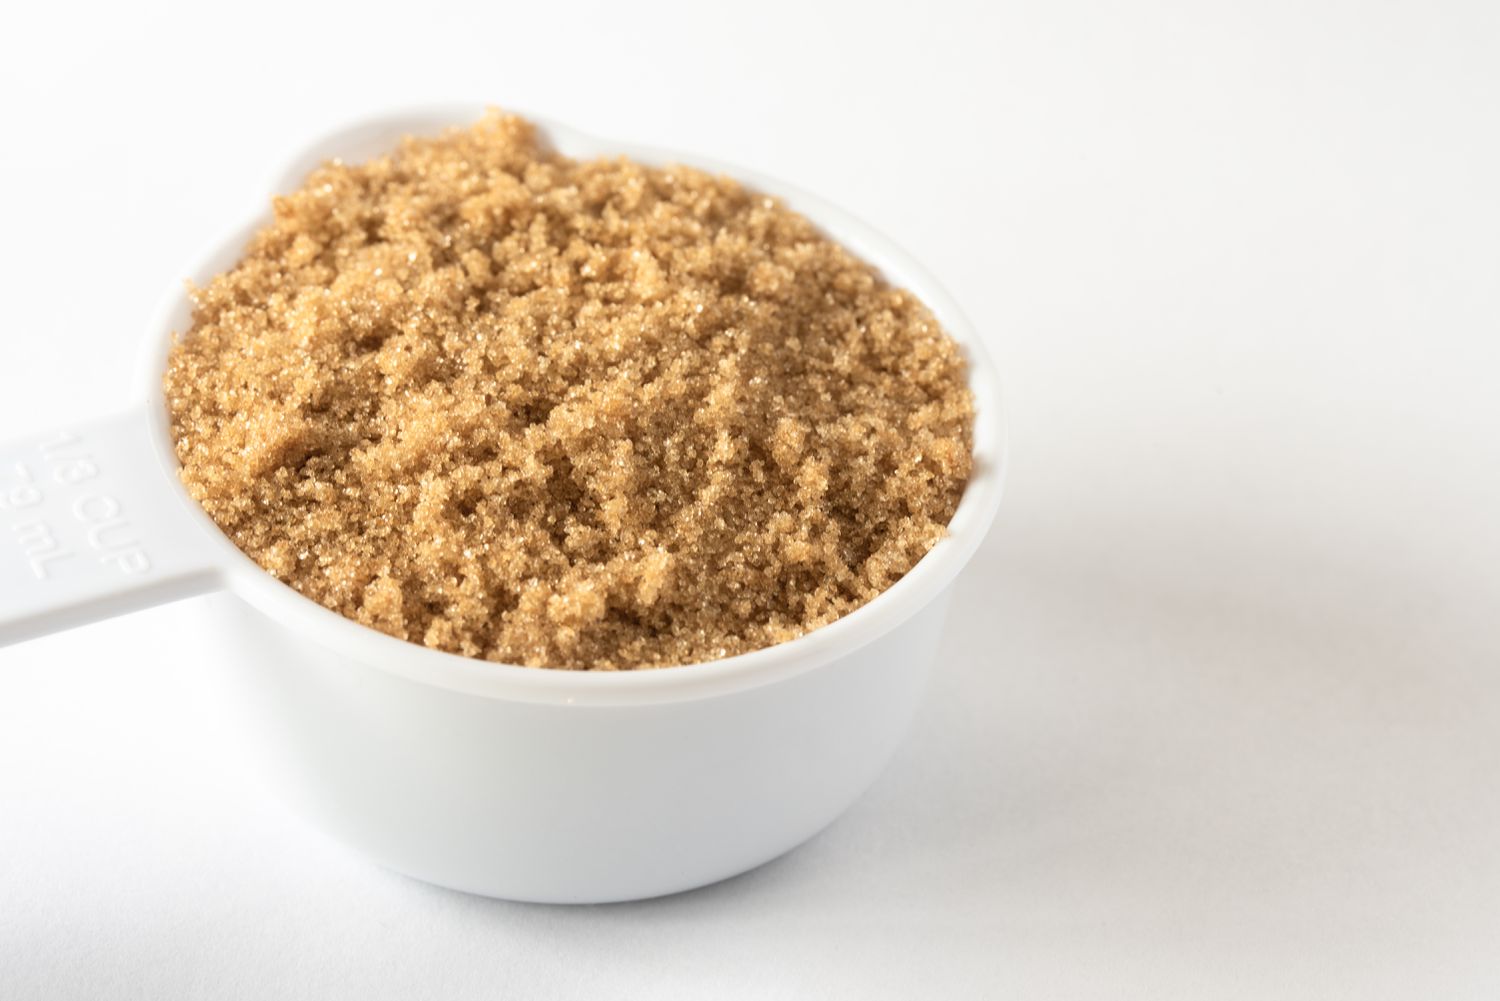 Brown Sugar vs. White Sugar: What’s the Difference? [Video]